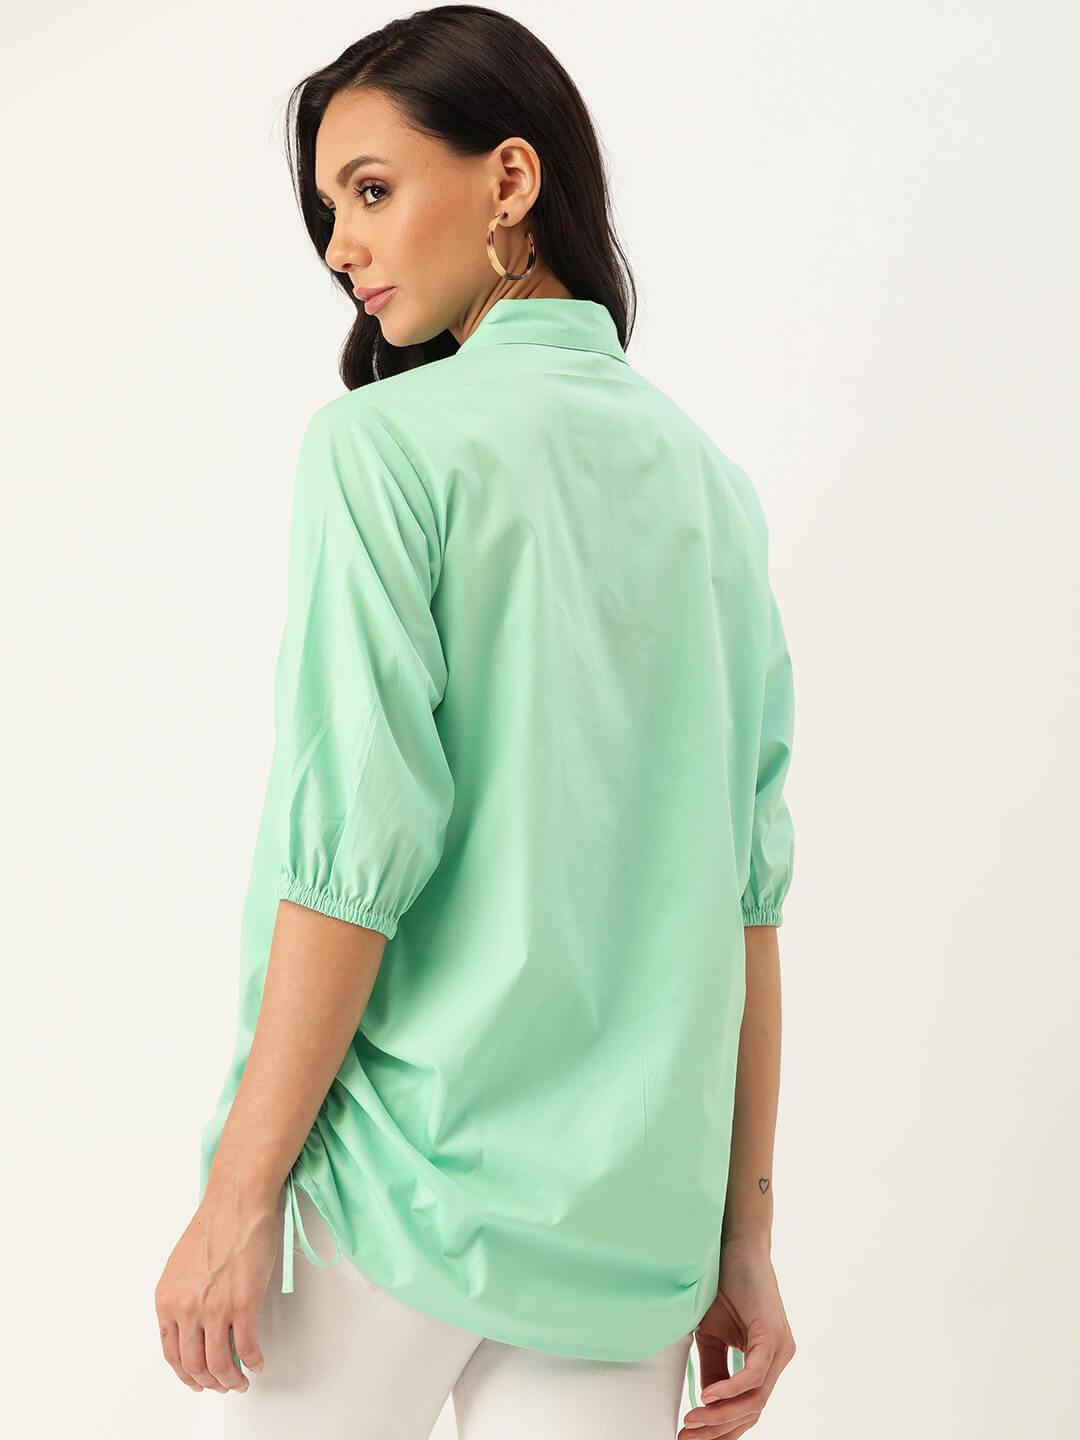 Eco Collared Anti Fit Shirt With Button Down, Side Draw String Puller, Quarter Sleeves With Cuff